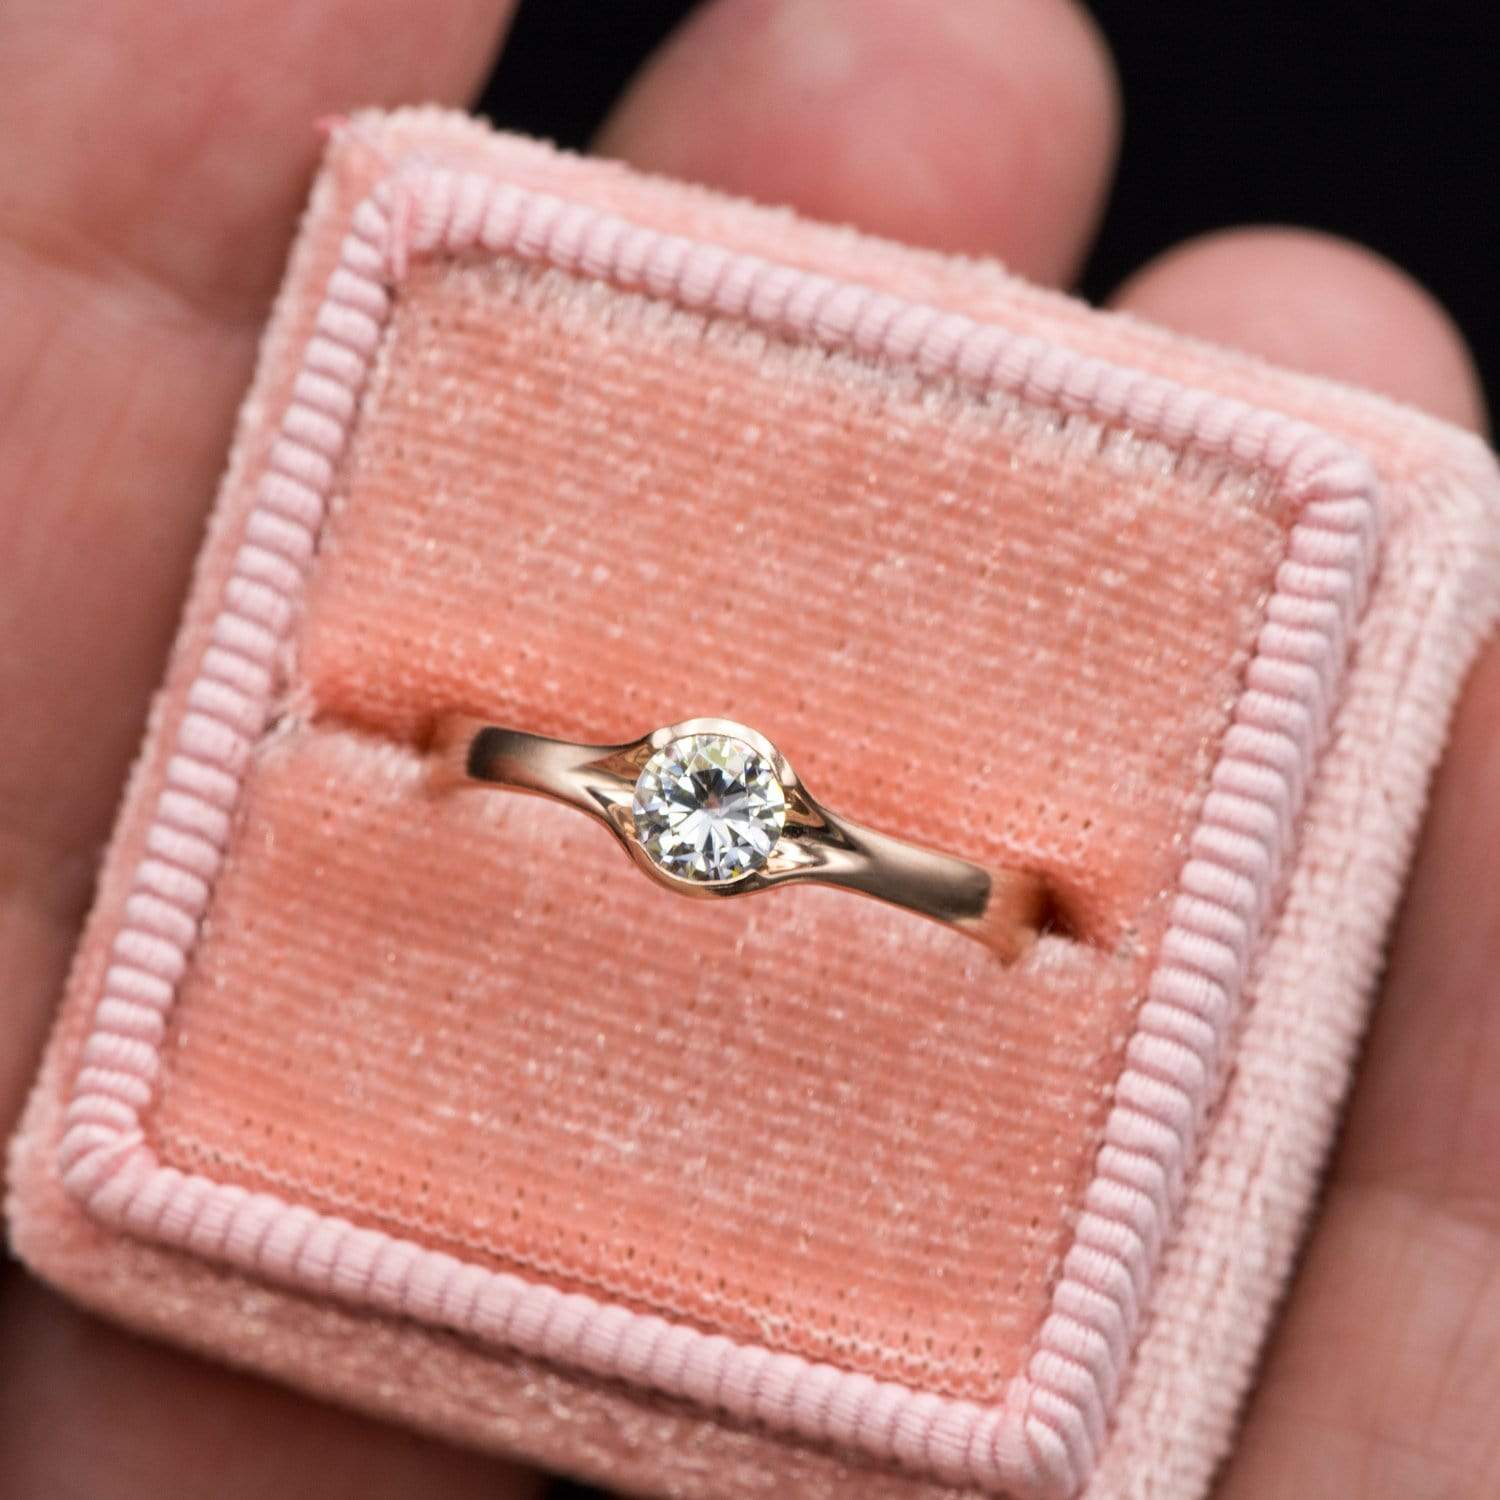 Round Light Gray Moissanite Half Bezel Fold Solitaire Rose Gold Engagement Ring, Ready to Ship 14k Rose Gold Ring Ready To Ship by Nodeform